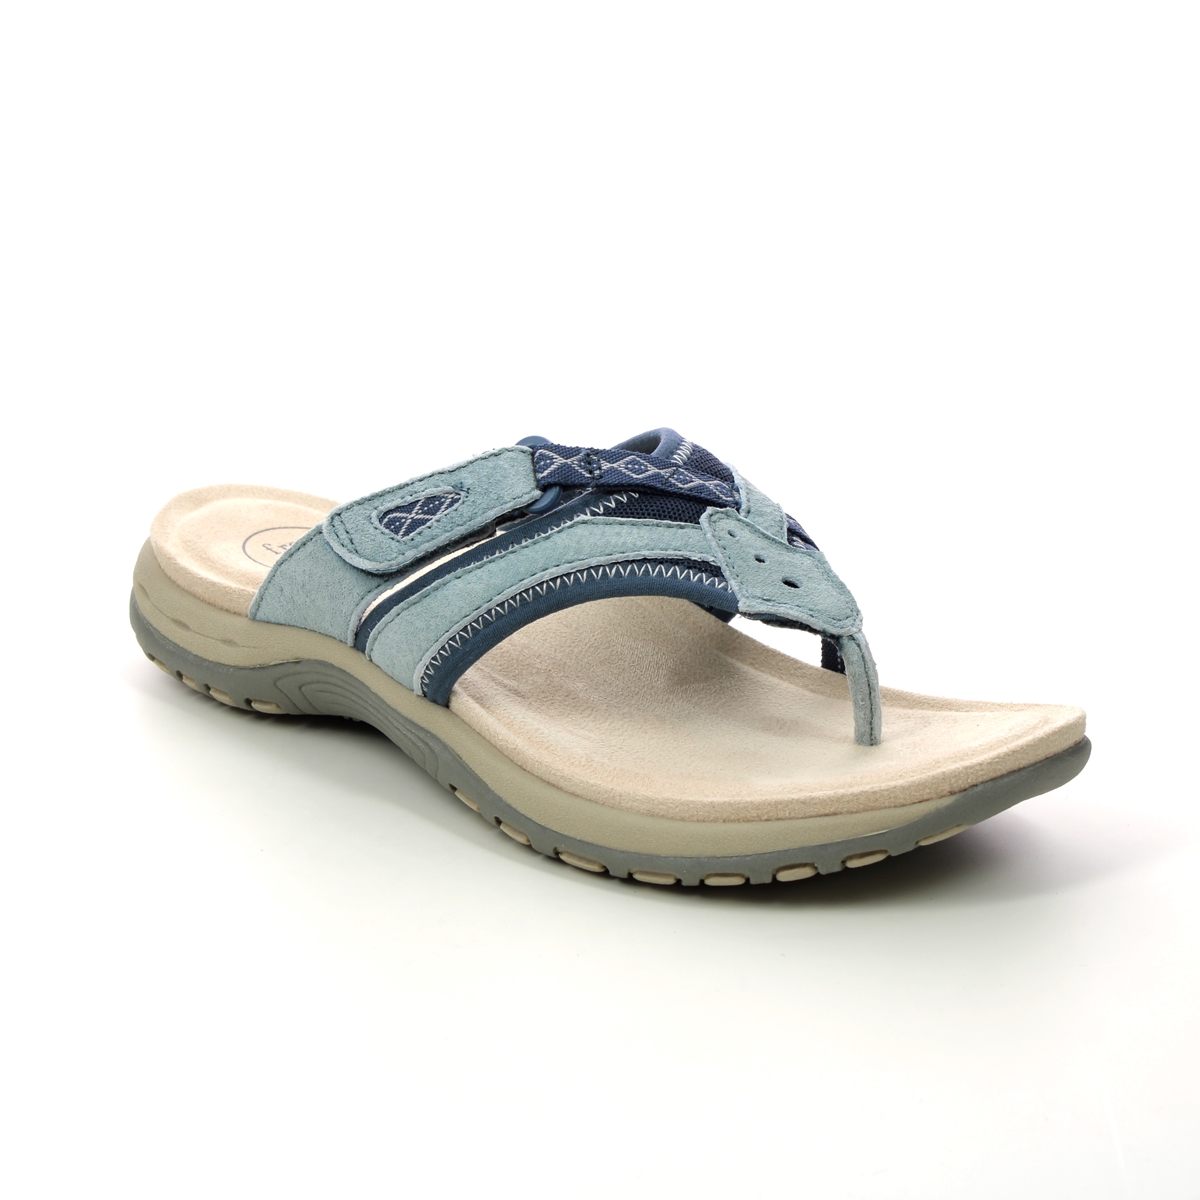 Earth Spirit Juliet 01 Blue Suede Womens Toe Post Sandals 40511-72 in a Plain Leather in Size 9